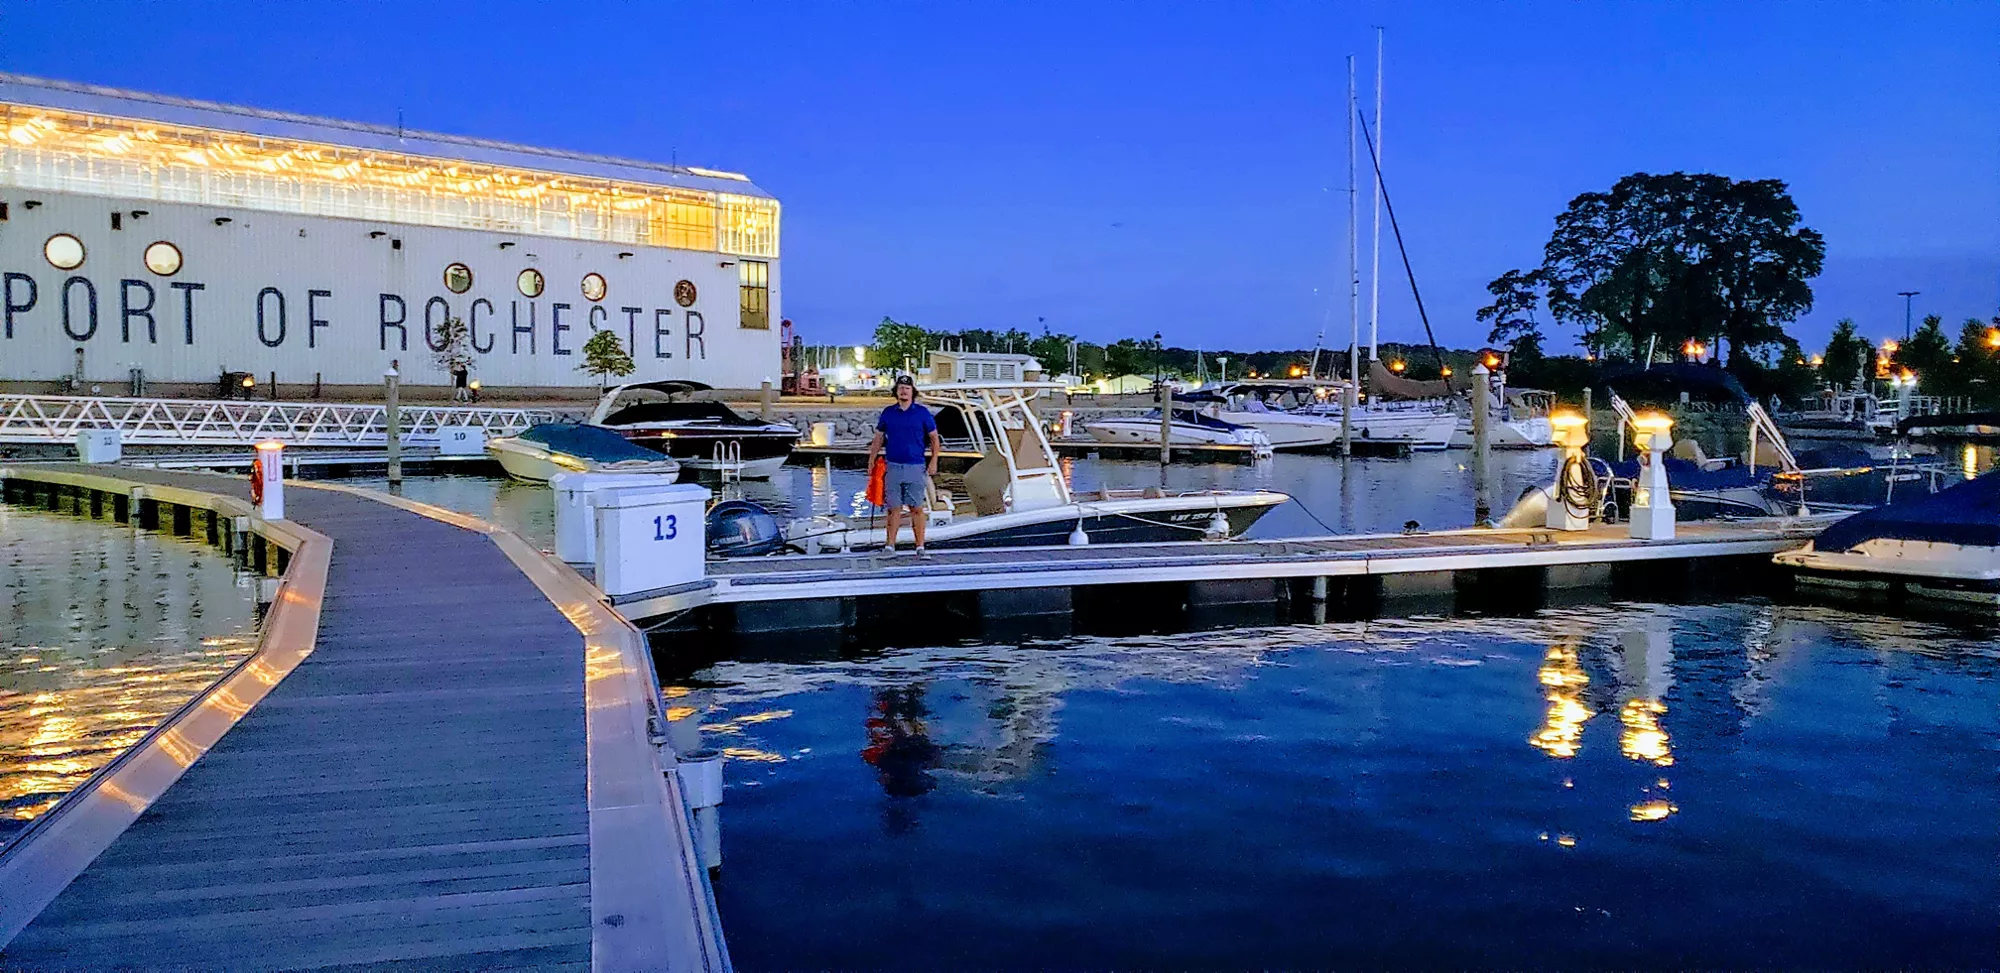 view of port of rochester freedom boat club marina